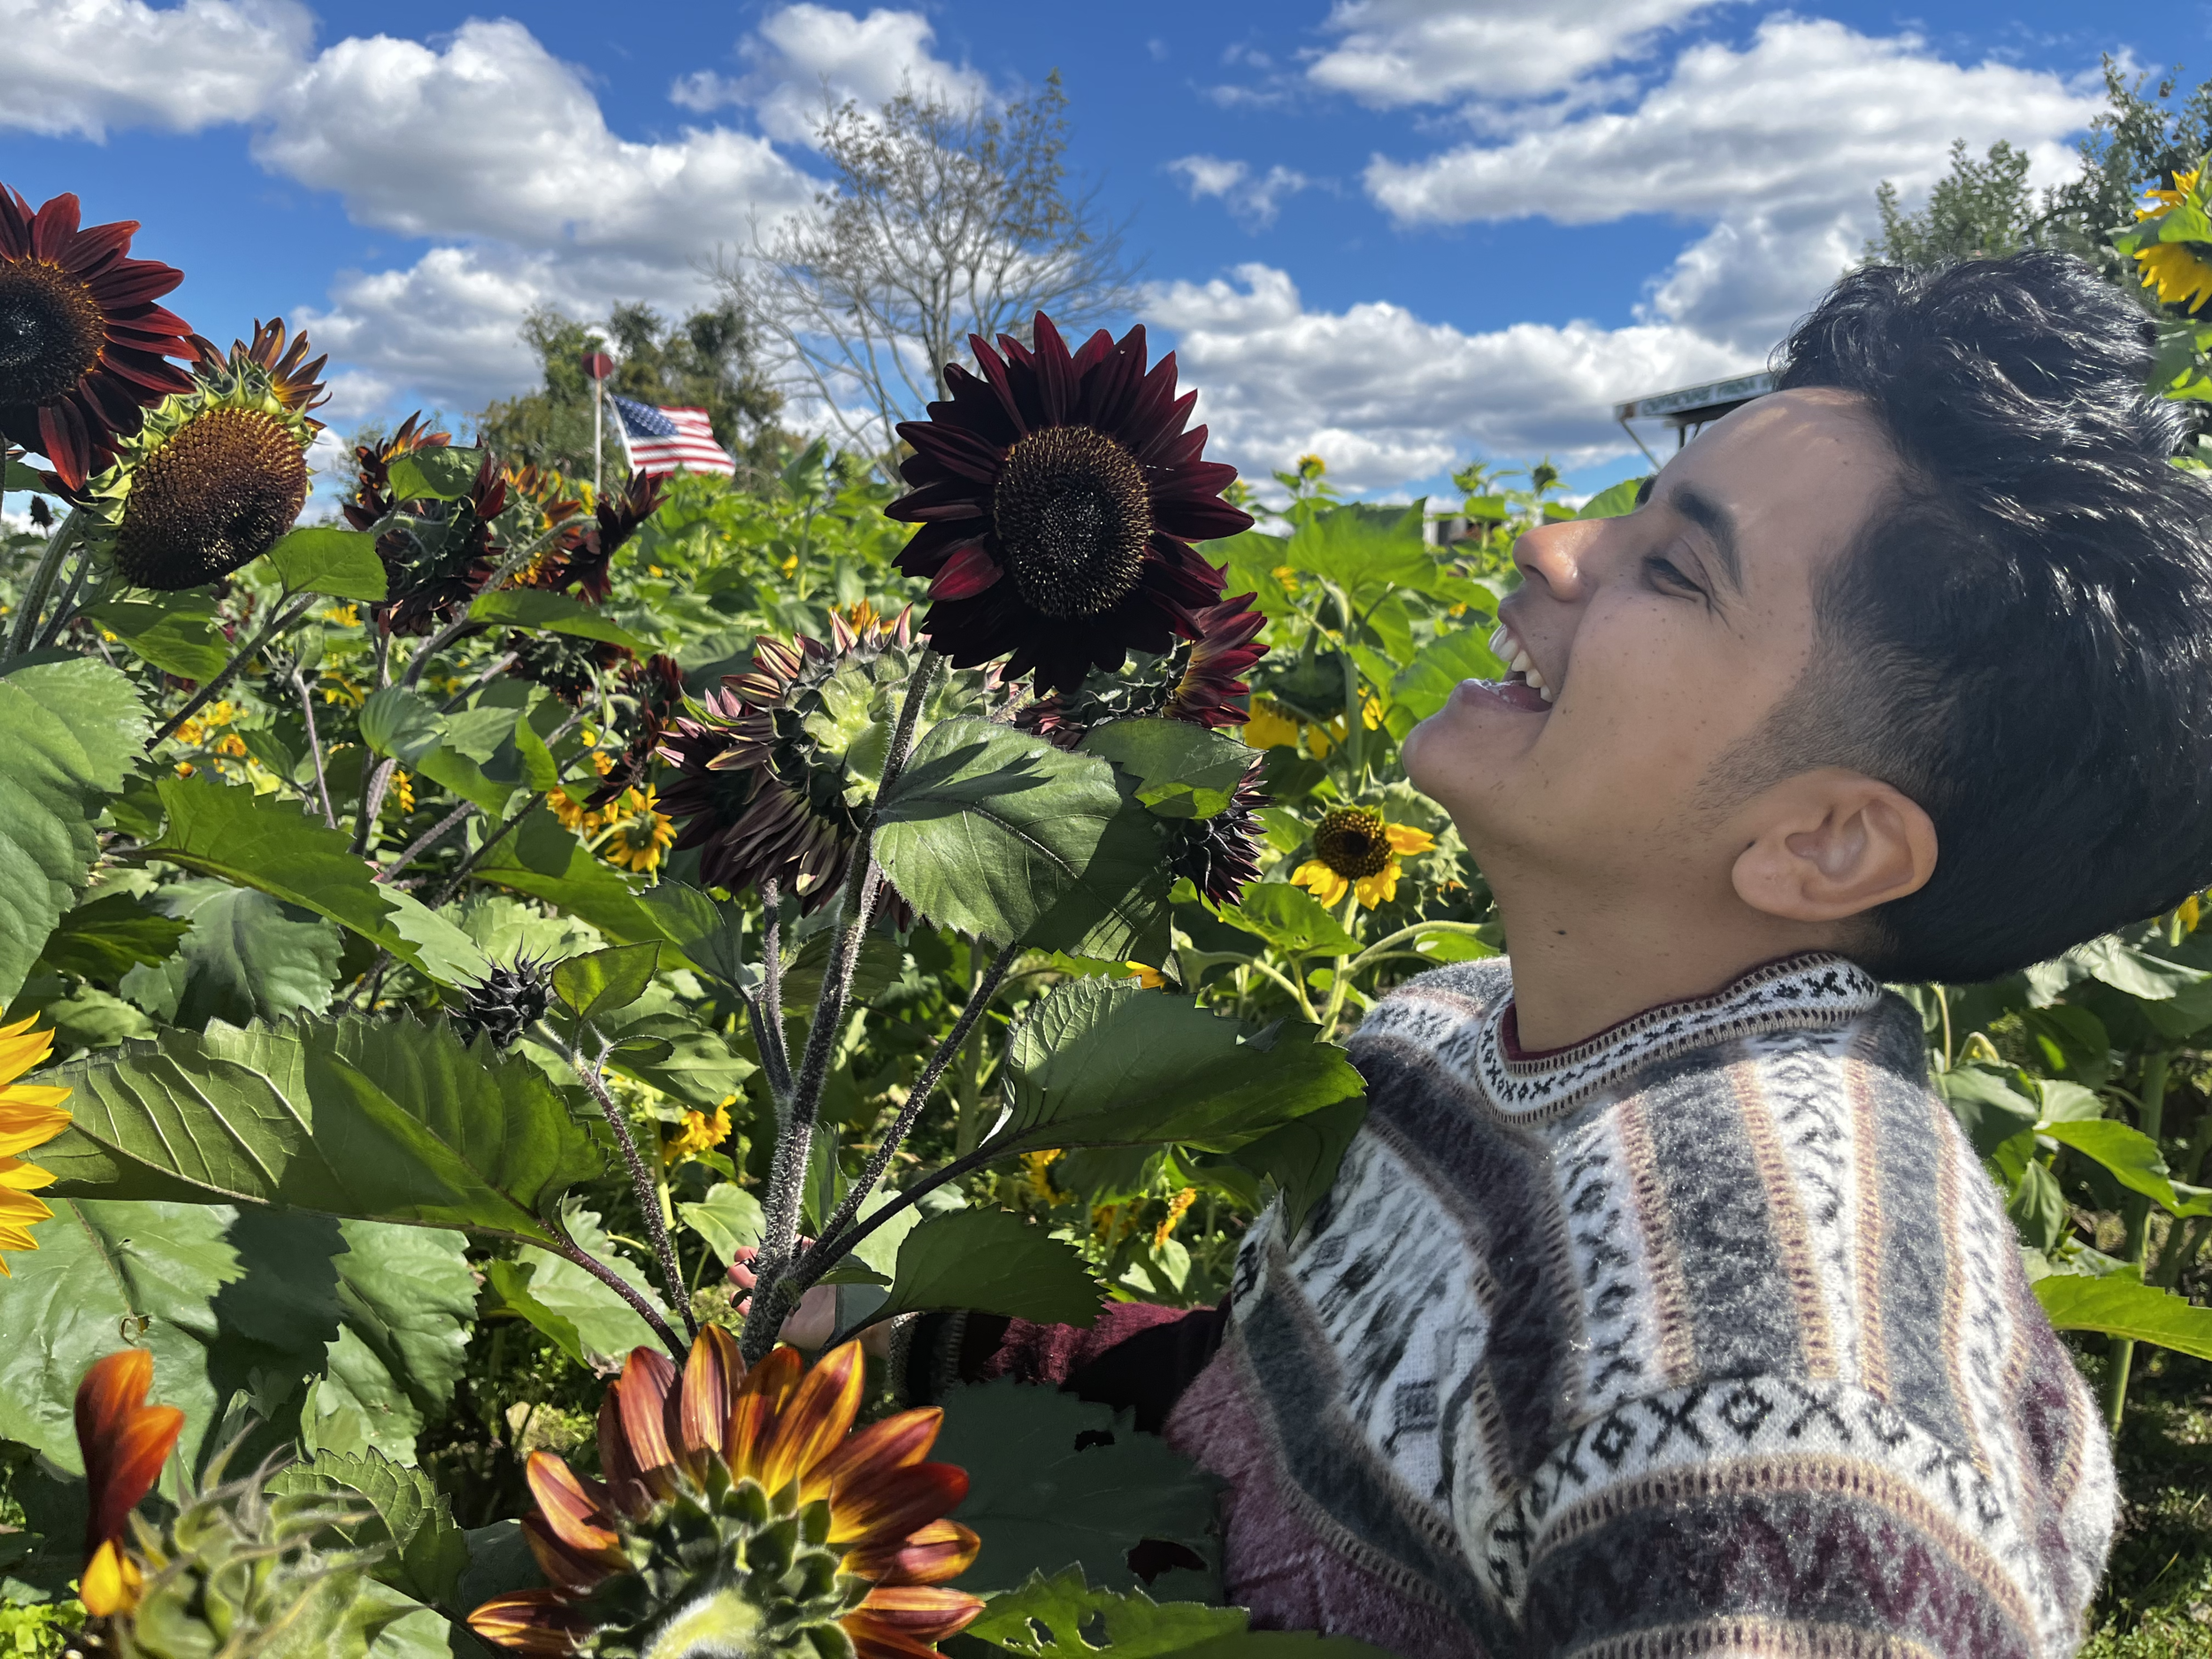 Alma soaking up some sunflowers.